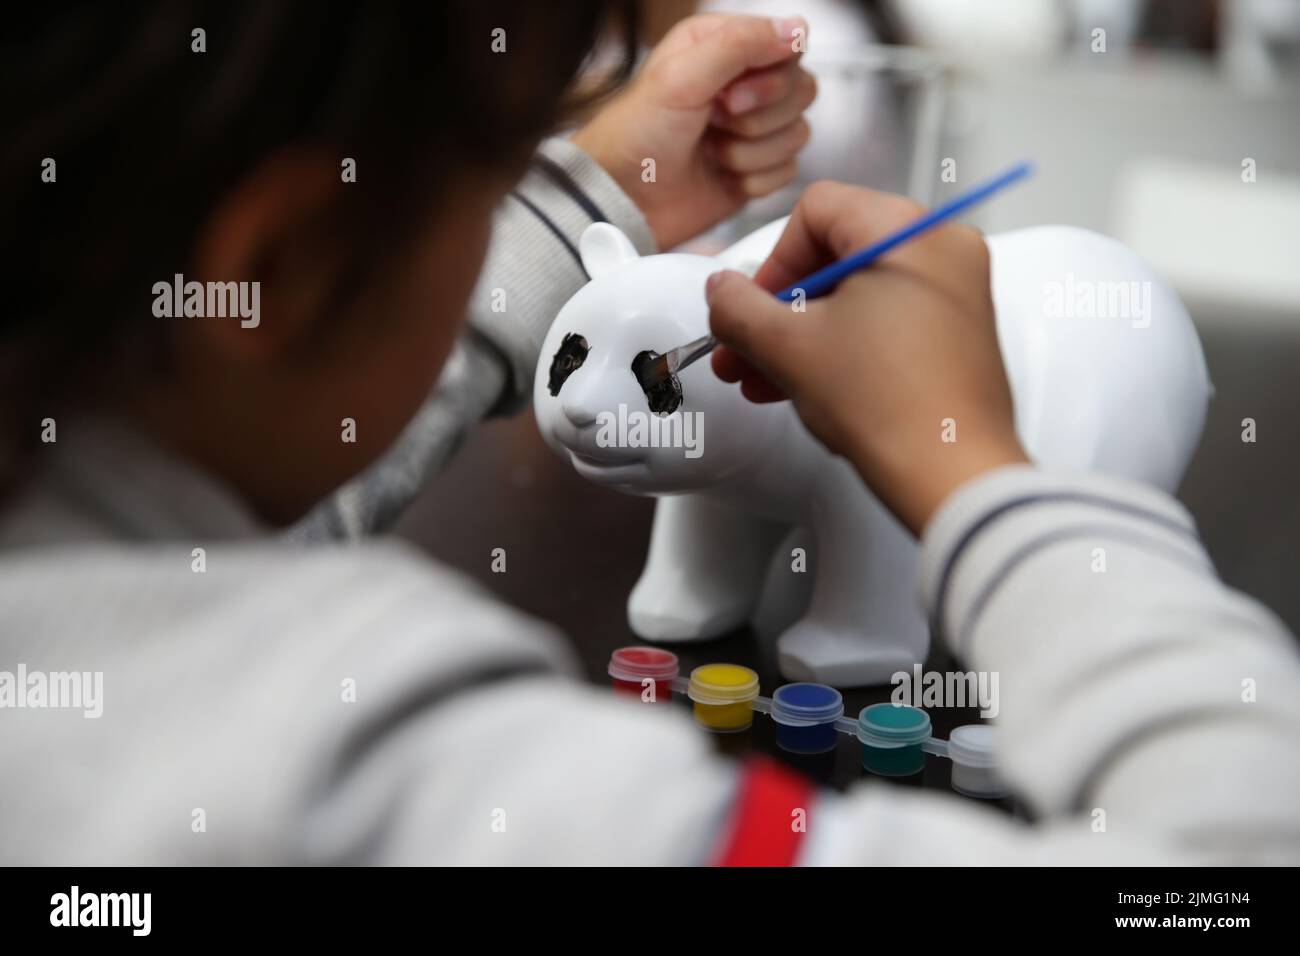 Brugelette, Belgium. 6th Aug, 2022. A child colors a giant panda doll during a celebration activity of the third birthday of the panda twins Bao Di and Bao Mei at the Pairi Daiza zoo in Brugelette, Belgium, Aug. 6, 2022. The celebration of the third birthday of the panda twins Bao Di and Bao Mei, born on Aug. 8, 2019 to Hao Hao and Xing Hui, was held at the Pairi Daiza zoo on Saturday. Credit: Zheng Huansong/Xinhua/Alamy Live News Stock Photo